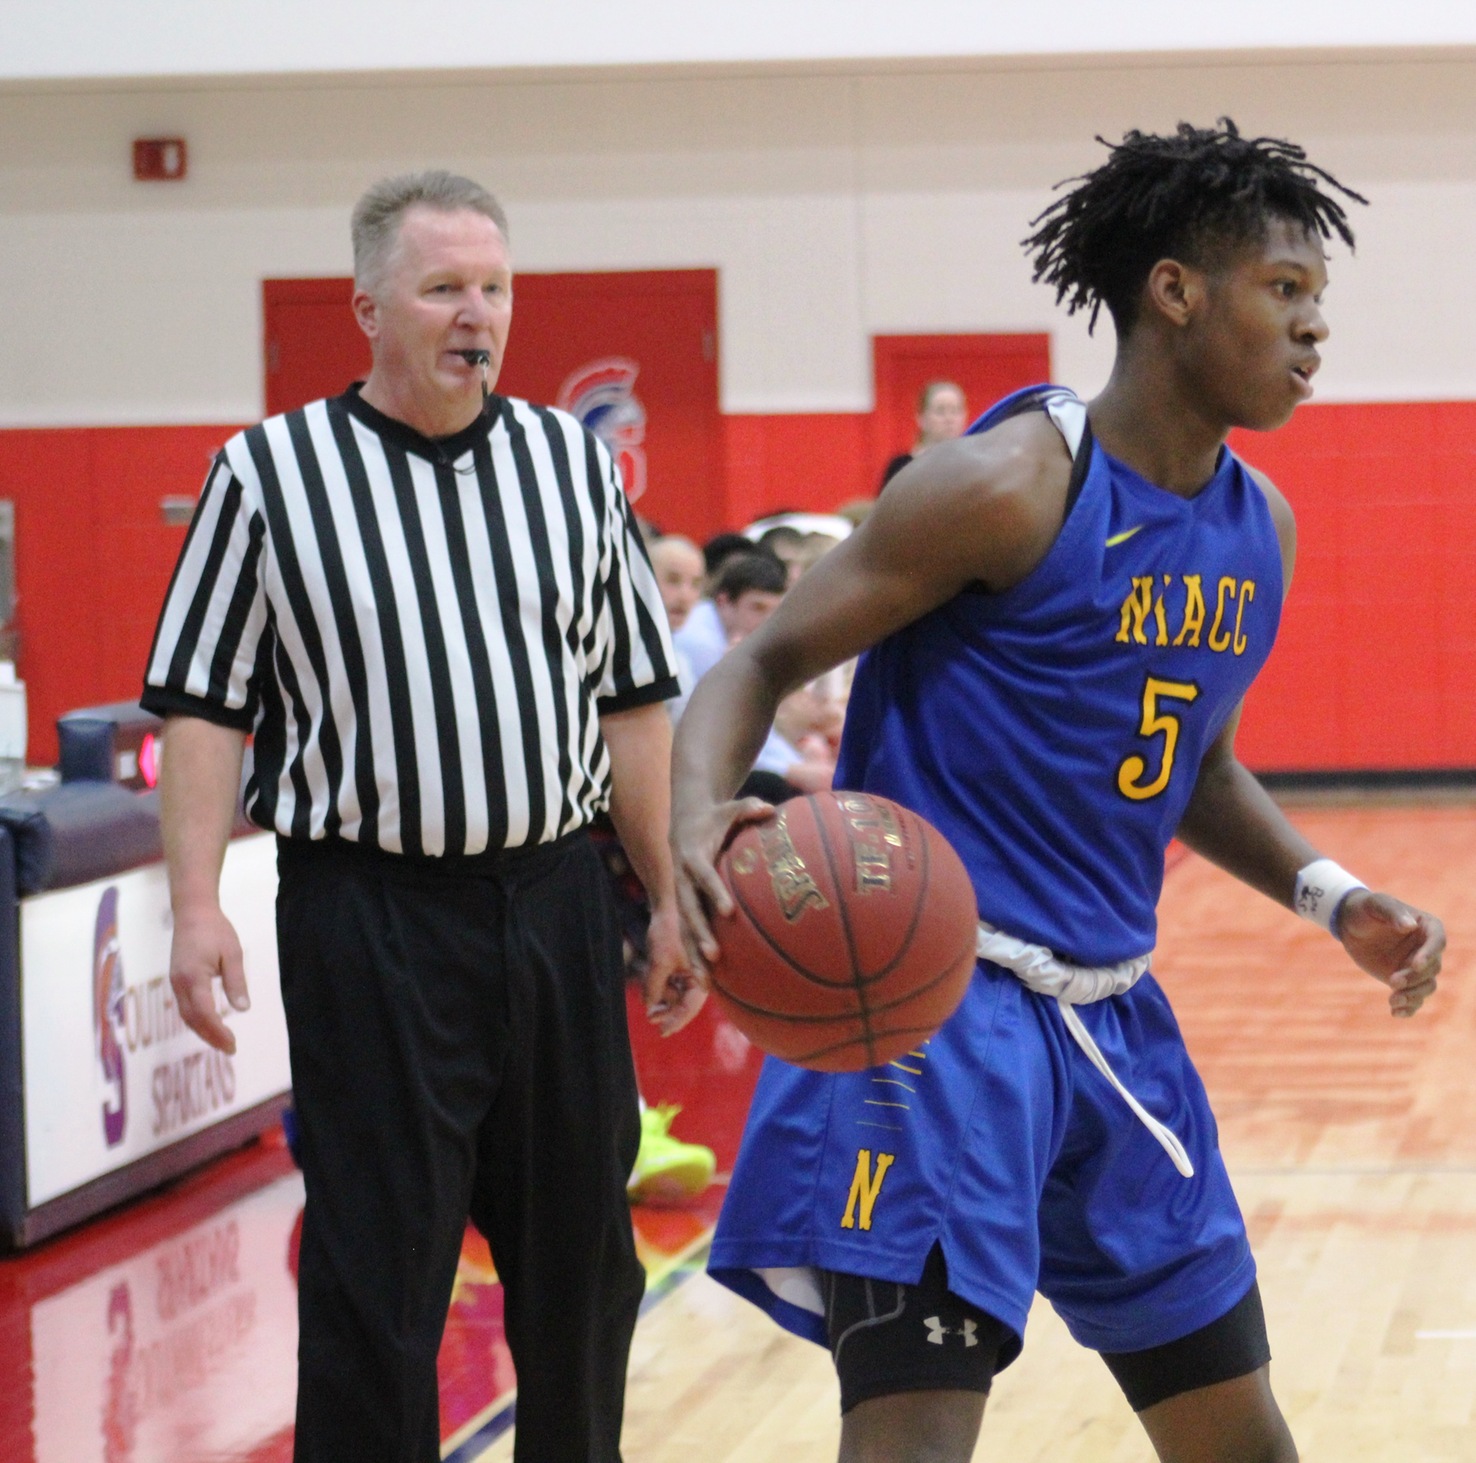 NIACC's Quentin Hardrict looks to make a move during a game at Southwestern in December.